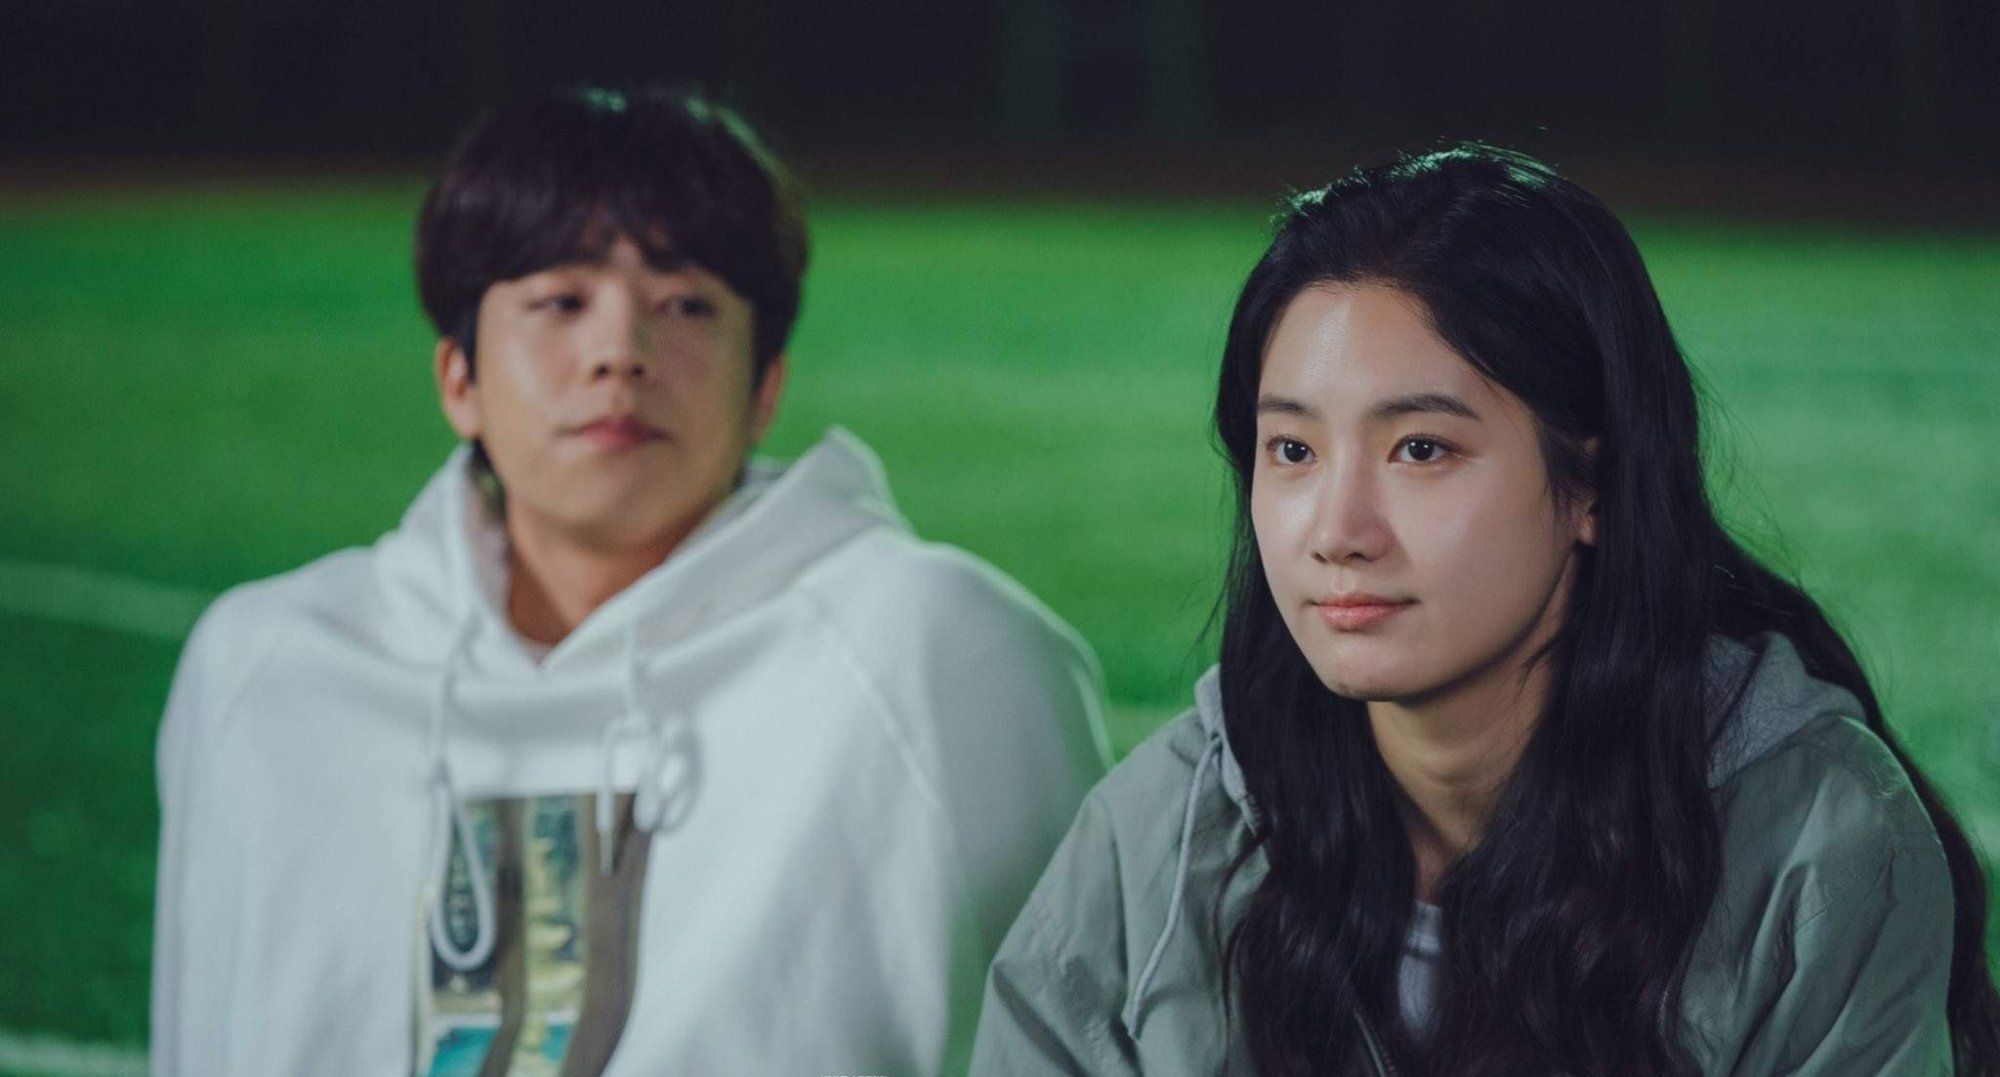 Chae Jong-hyeop and Park Ju-hyun in the 2022 romance K-drama 'Love All Play.'